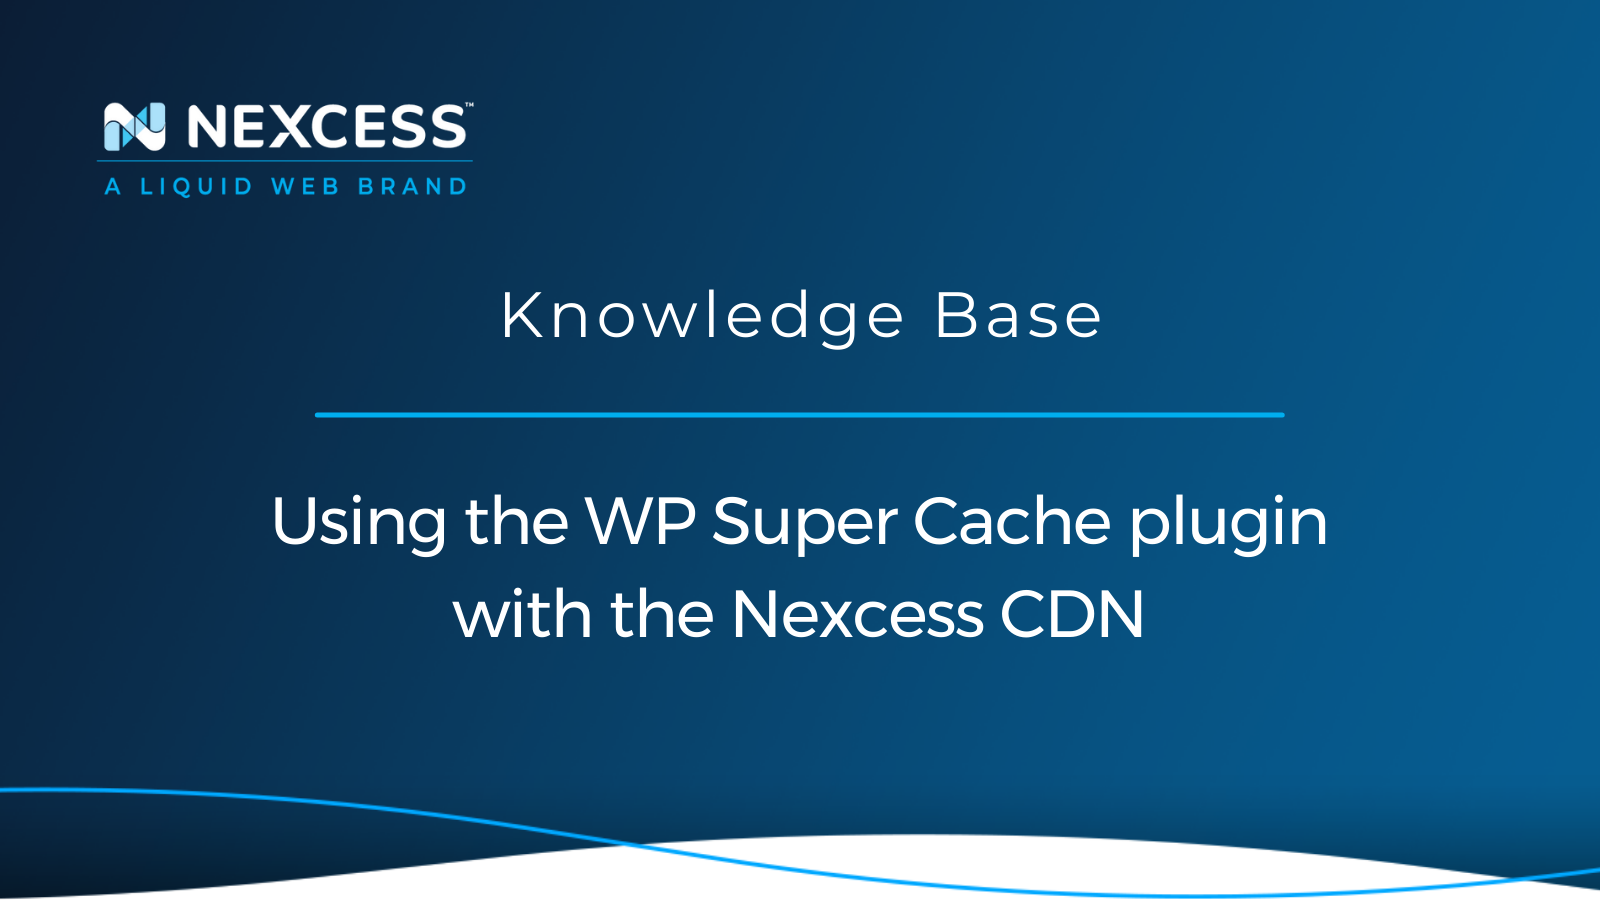 Using the WP Super Cache plugin with the Nexcess CDN